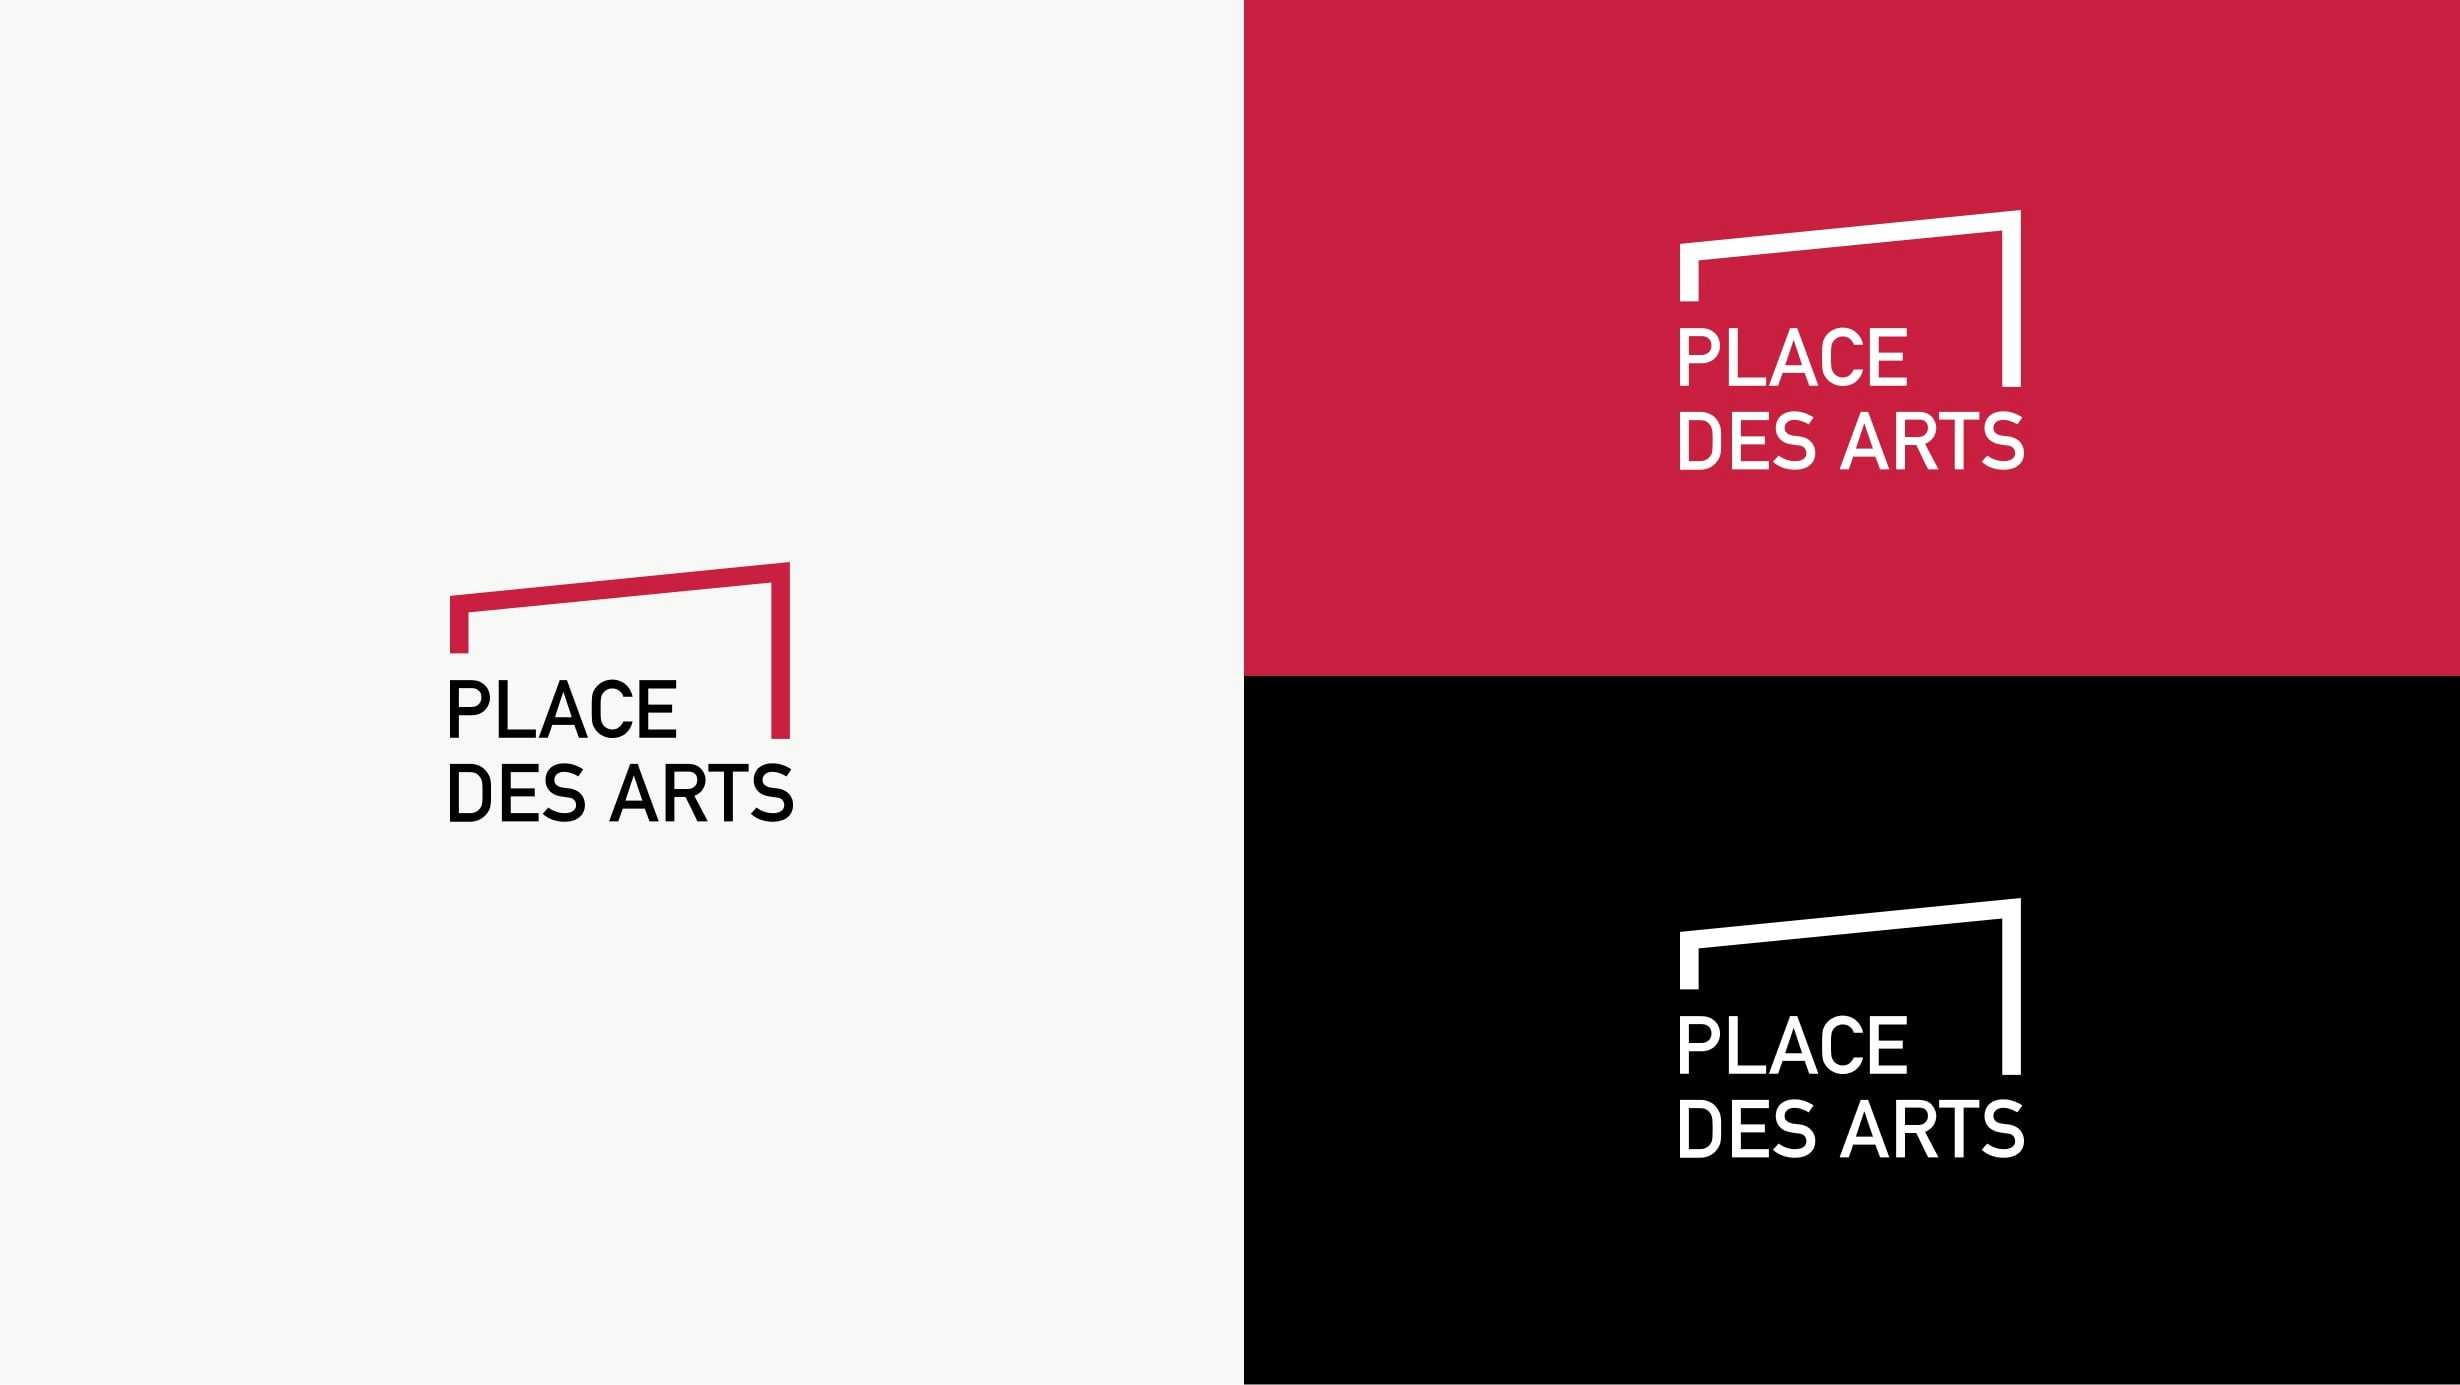 Place des Arts brand in different colour applications